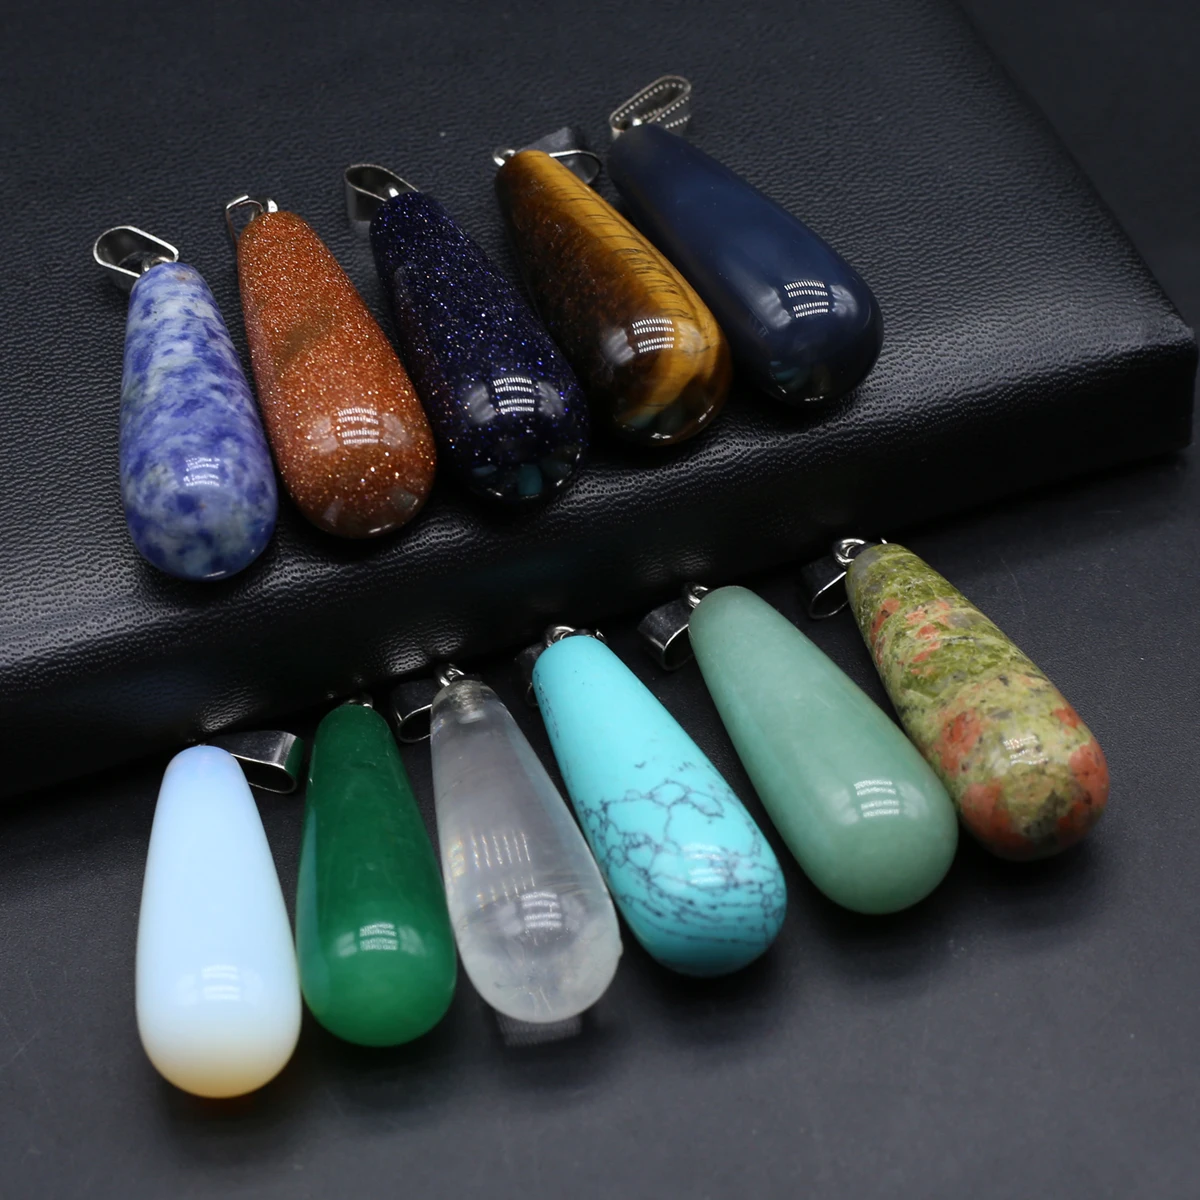 

10PCS Charming Natural Stone Crystal Agate Turquoise Droplet Shape Pendant Jewelry Making DIY Necklace Earrings Accessories Gift